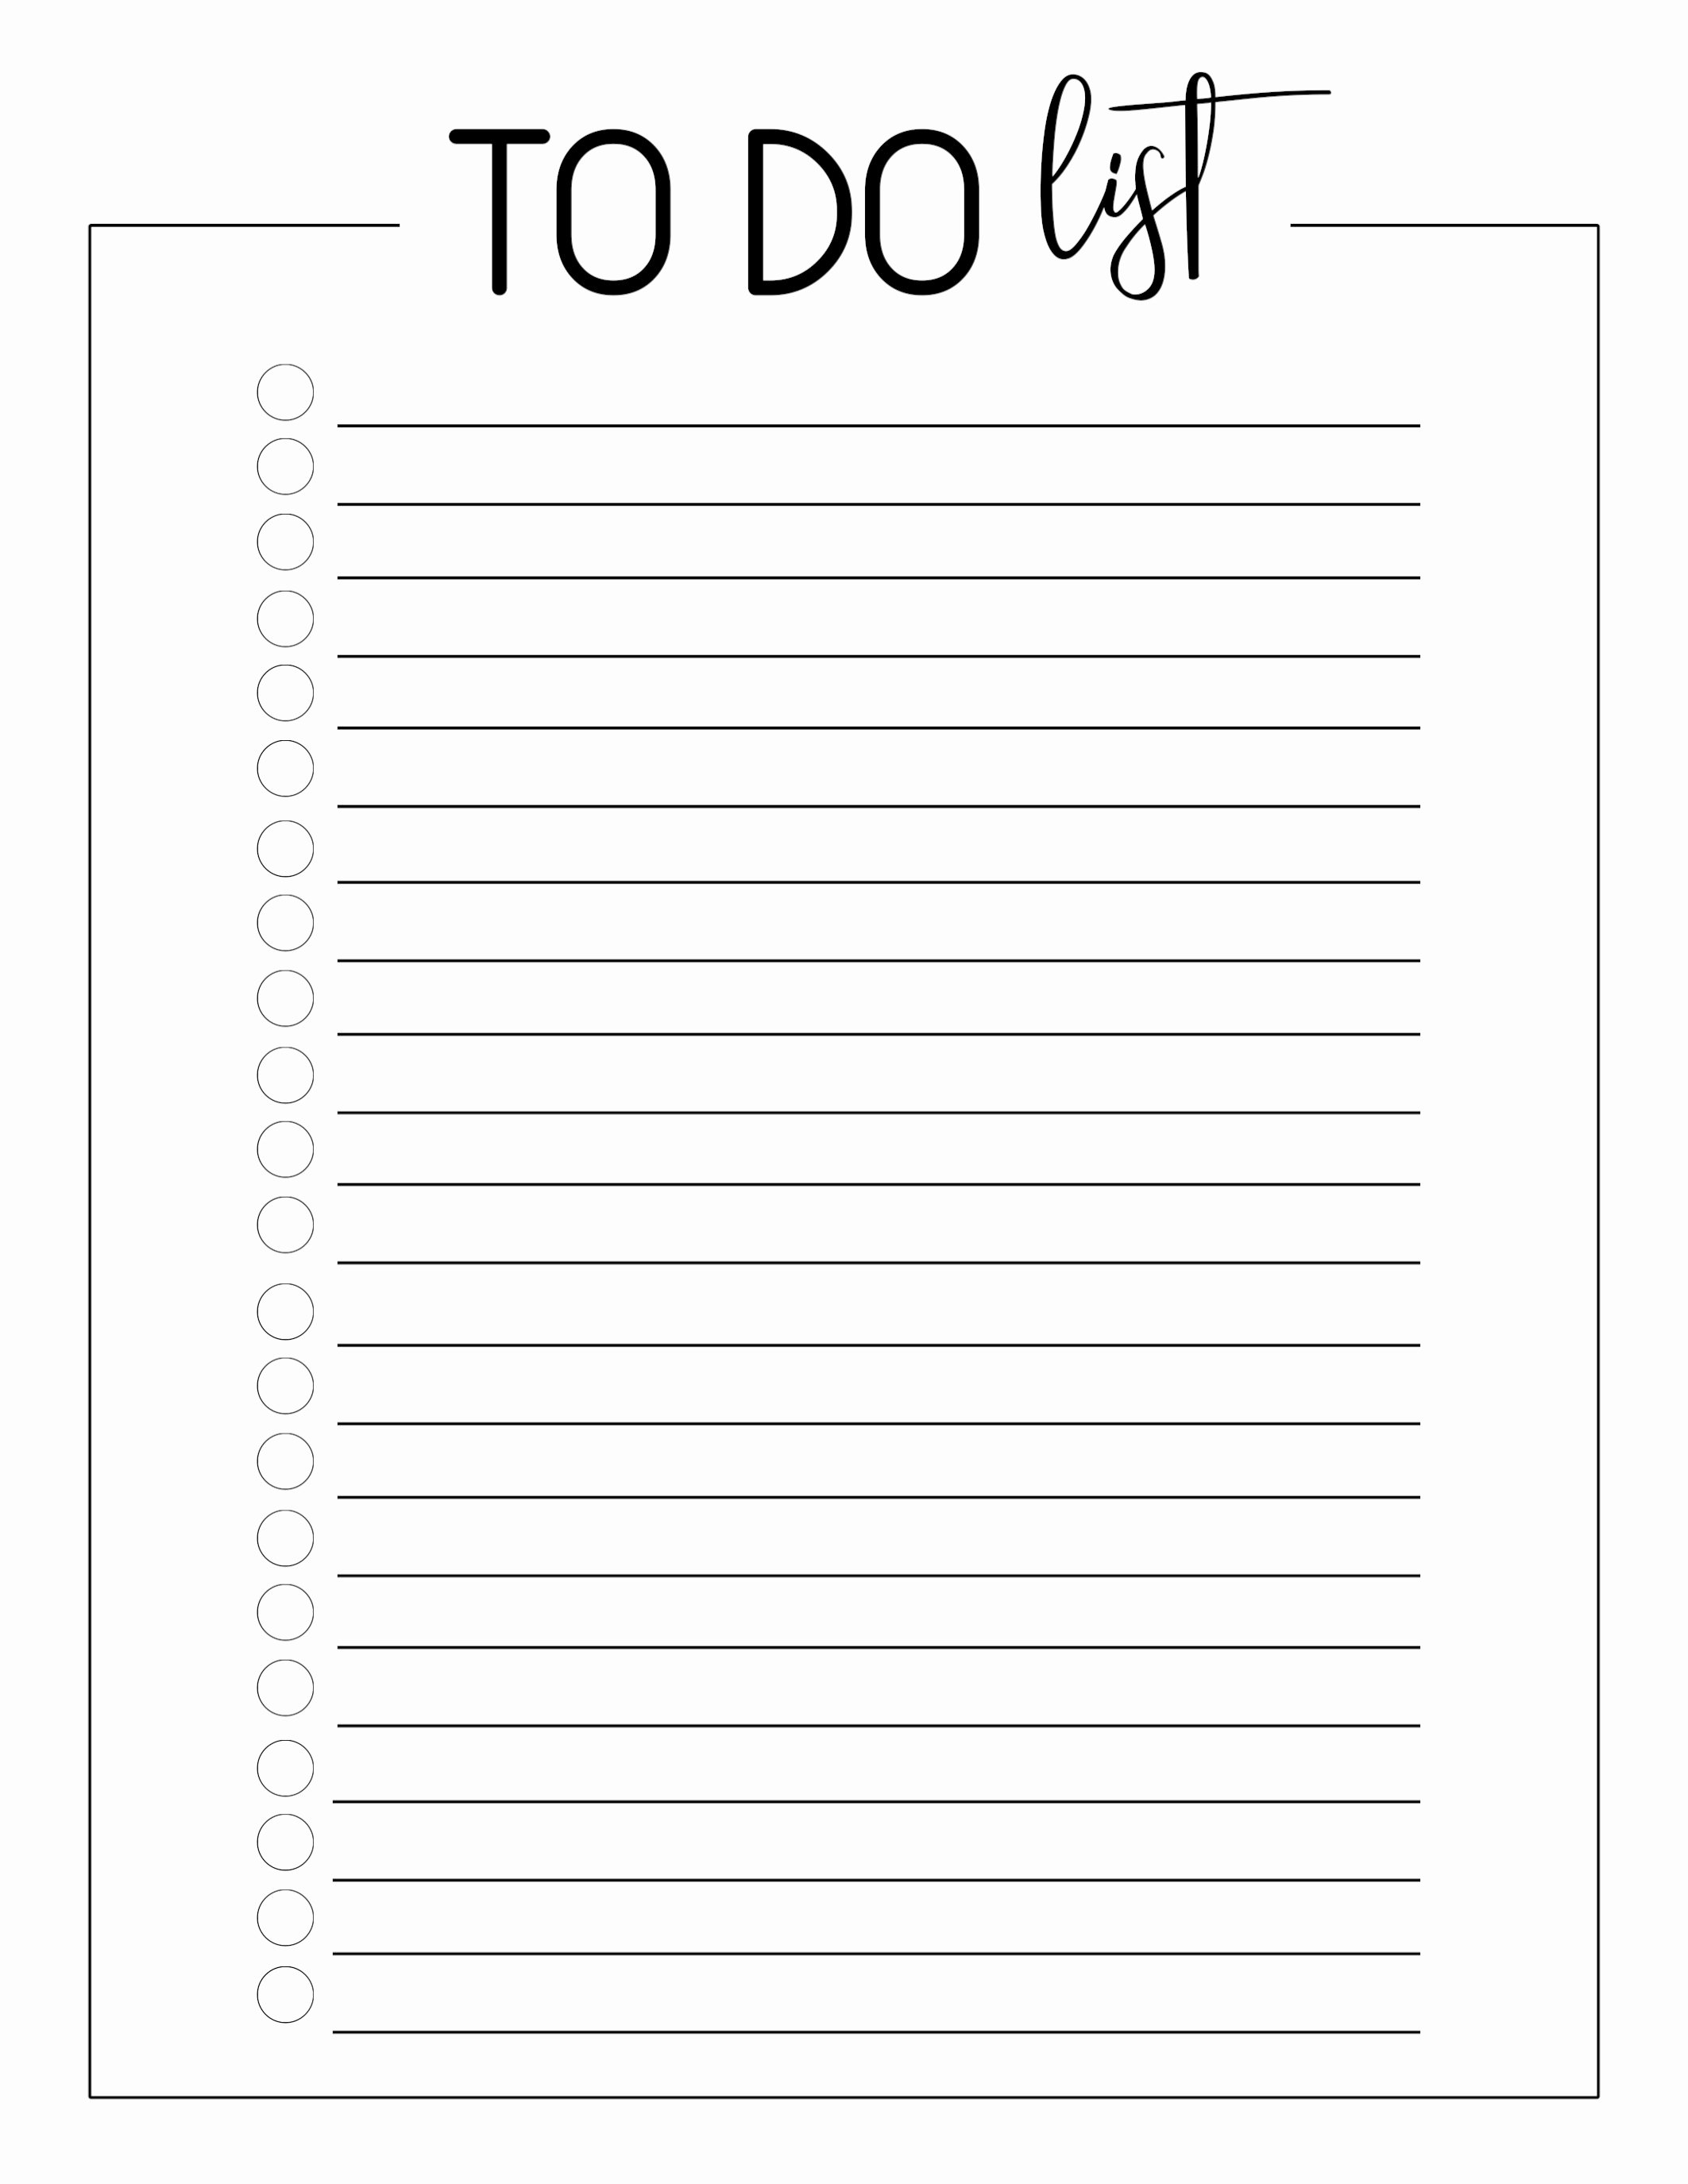 To Do List Template Free Elegant Free Printable to Do Checklist Template Paper Trail Design